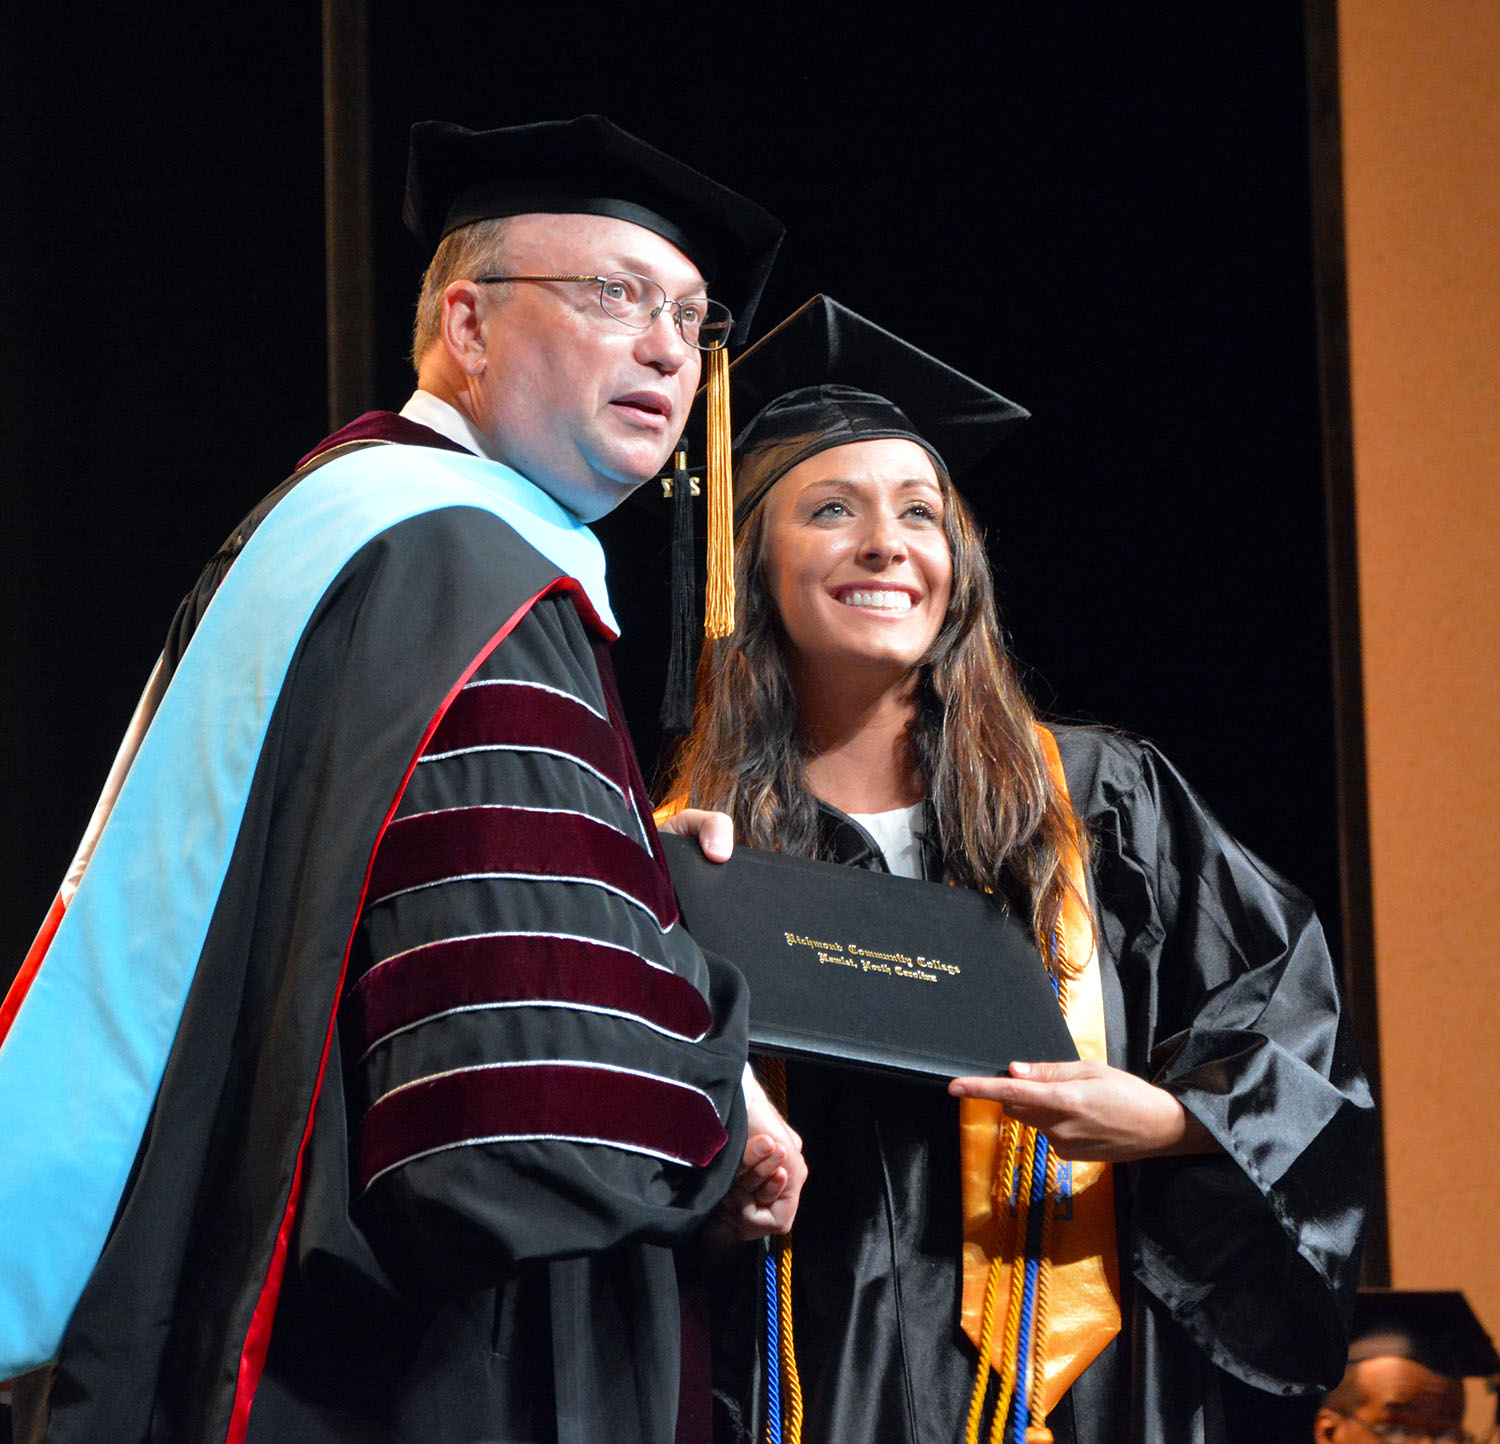 Dr. Dale McInnis handing Mary Lampley her diploma